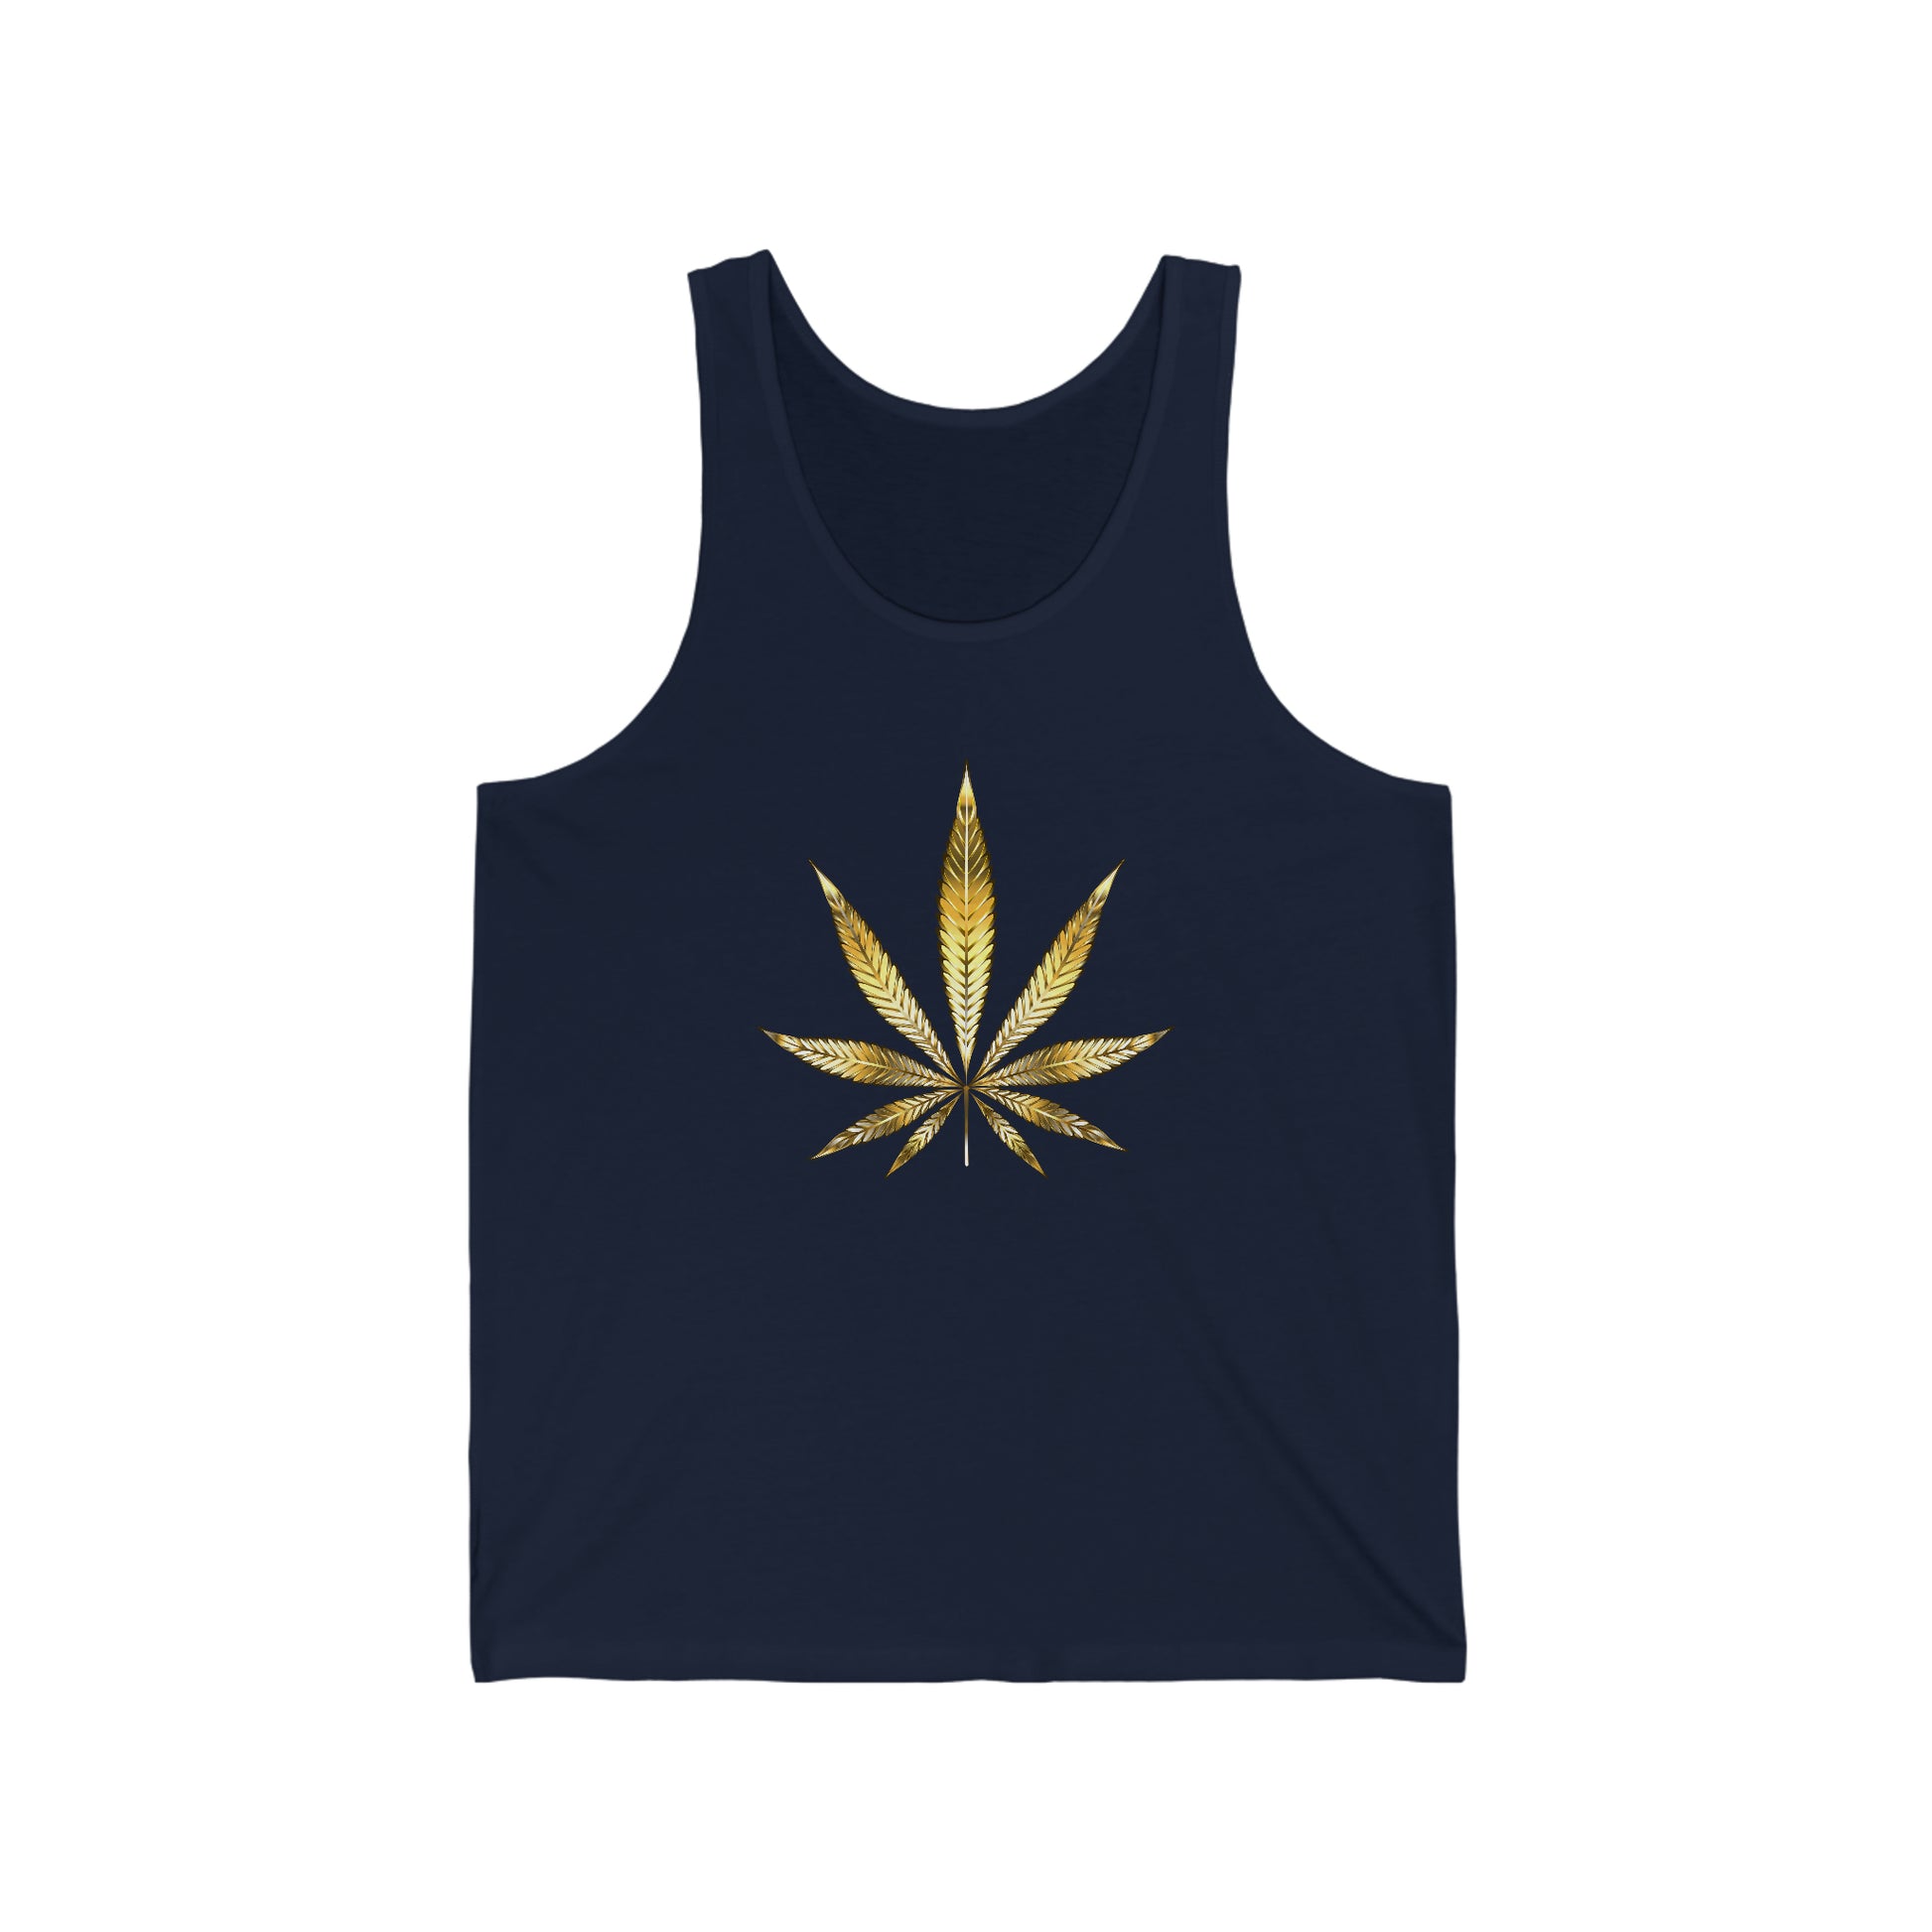 Navy blue weed tank top jersey with a bright gold weed leaf in the center